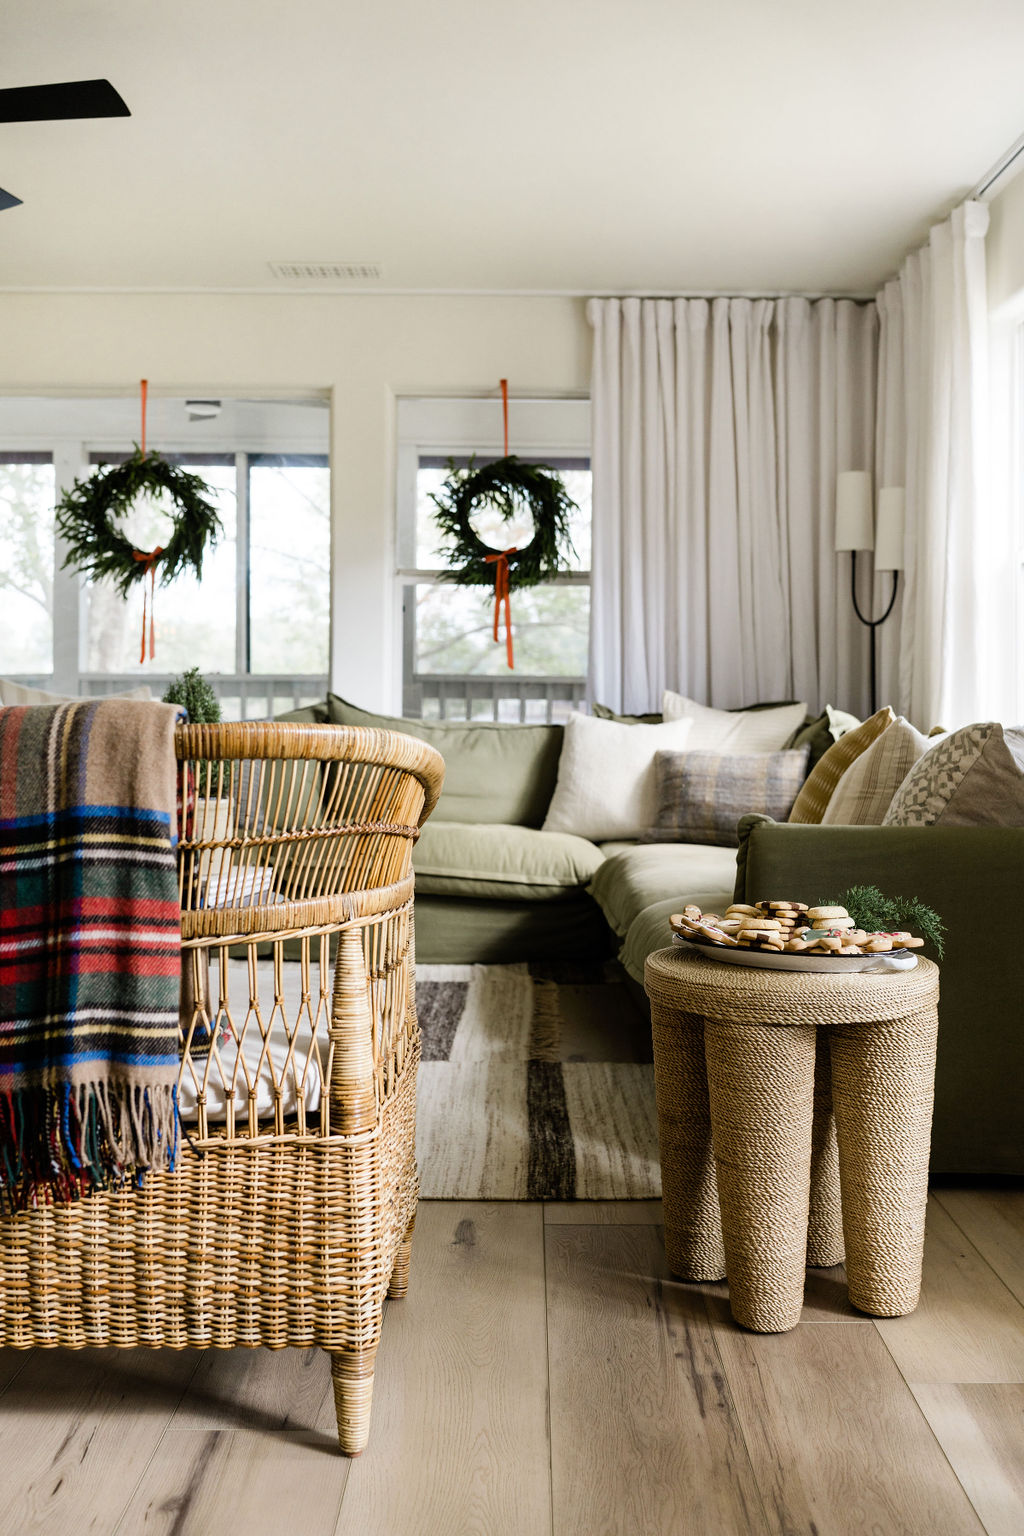 textural woven chair and stool with holiday plaid blanket decorating accents